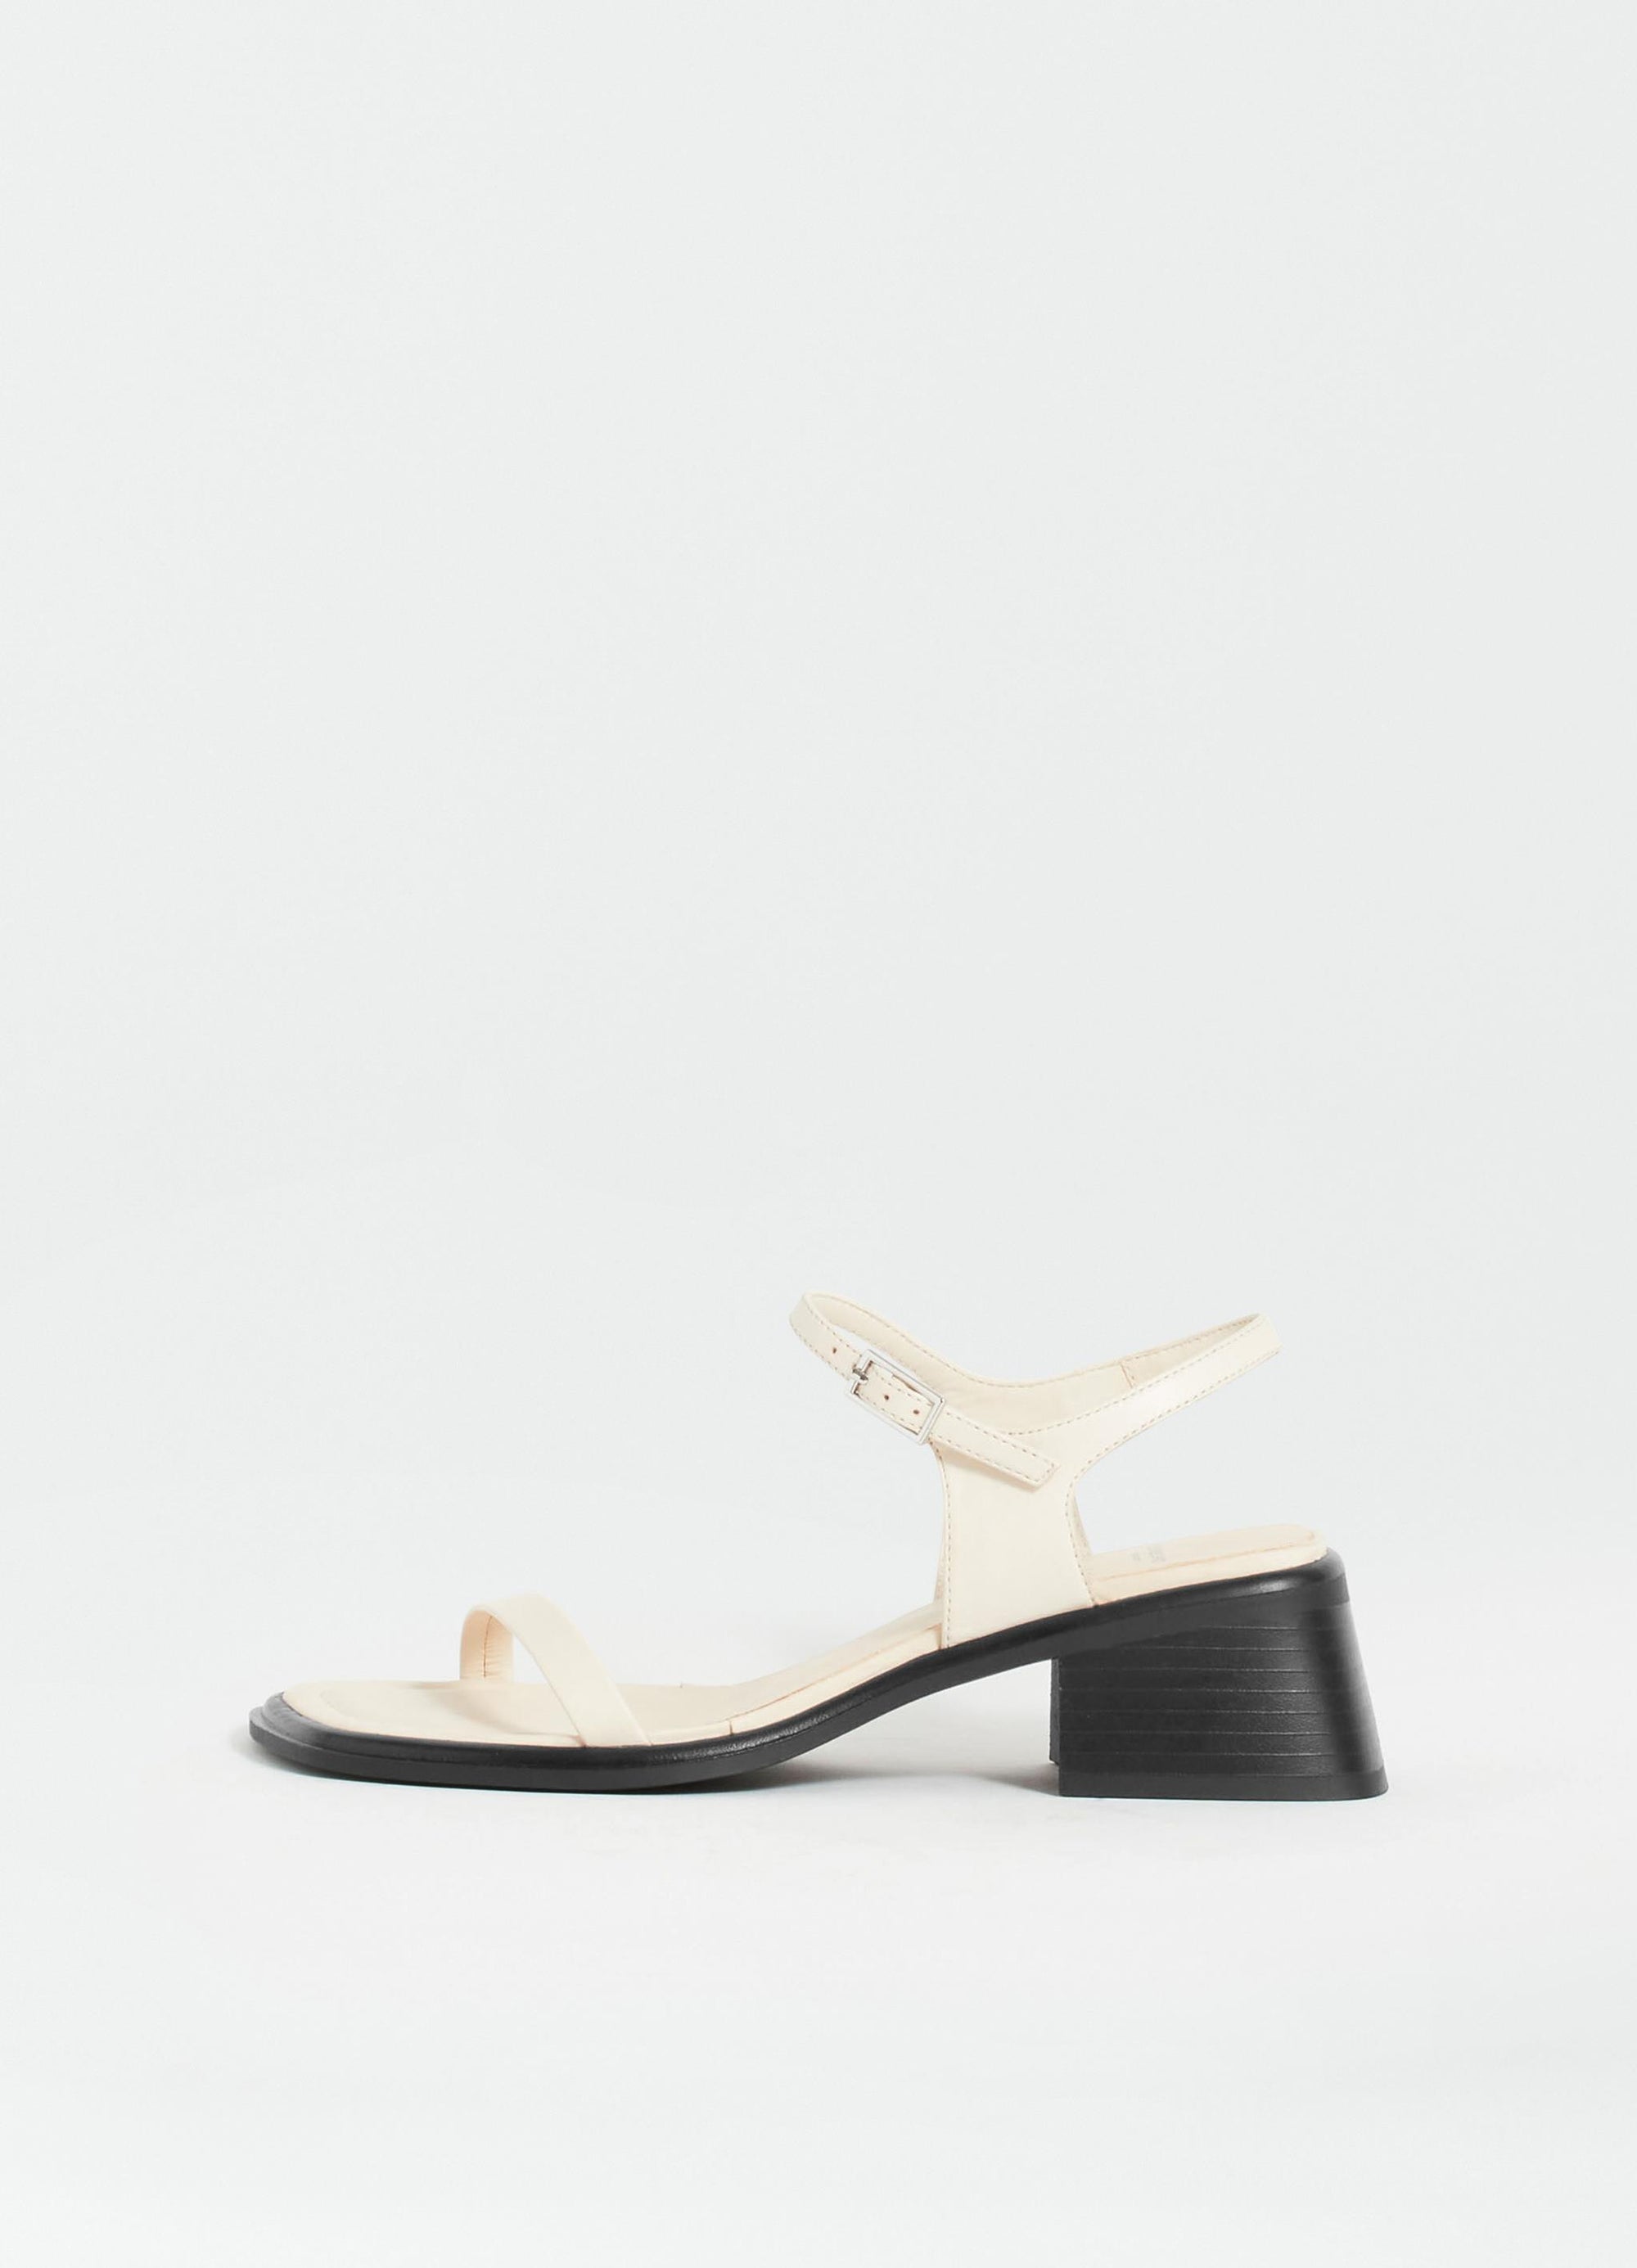 Vagabond Ines two strap leather sandal off white | PIPE AND ROW